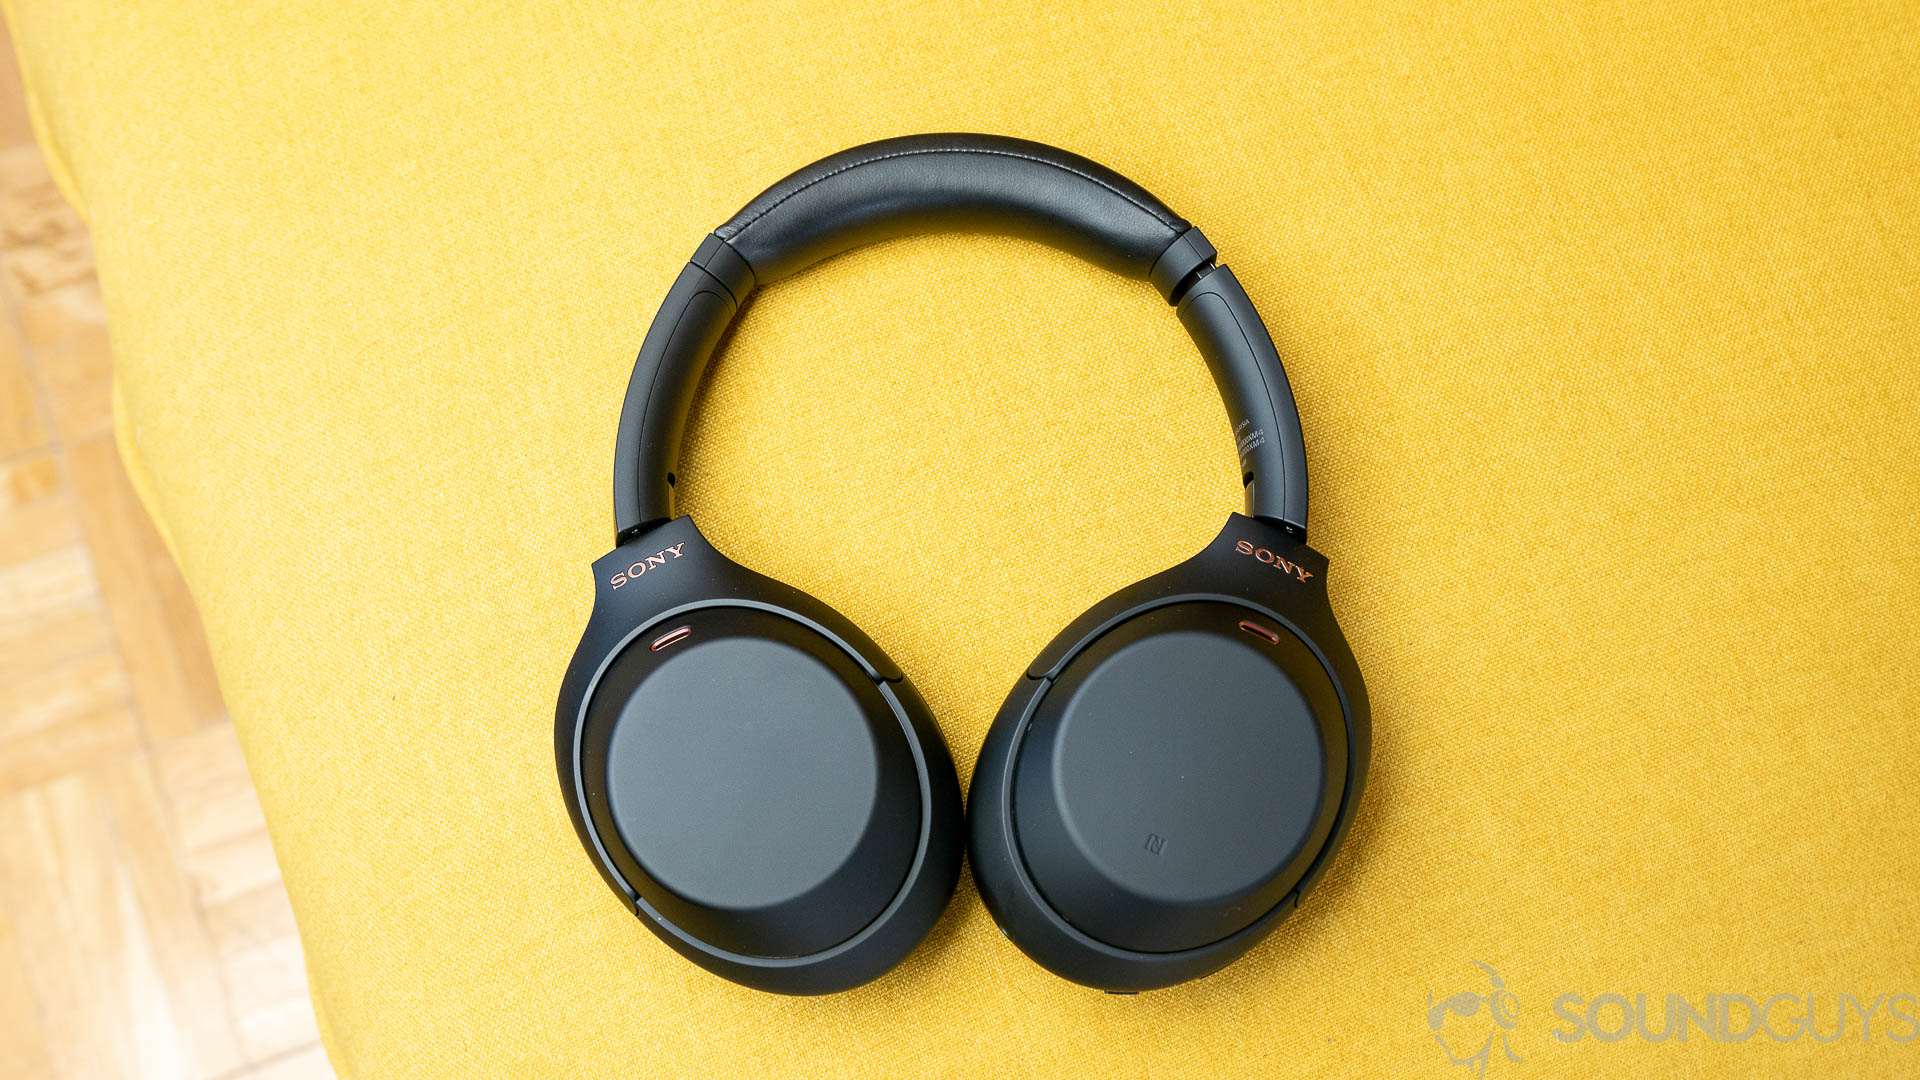 Sony WH-1000XM4 review: Still the best noise-cancelling headphones